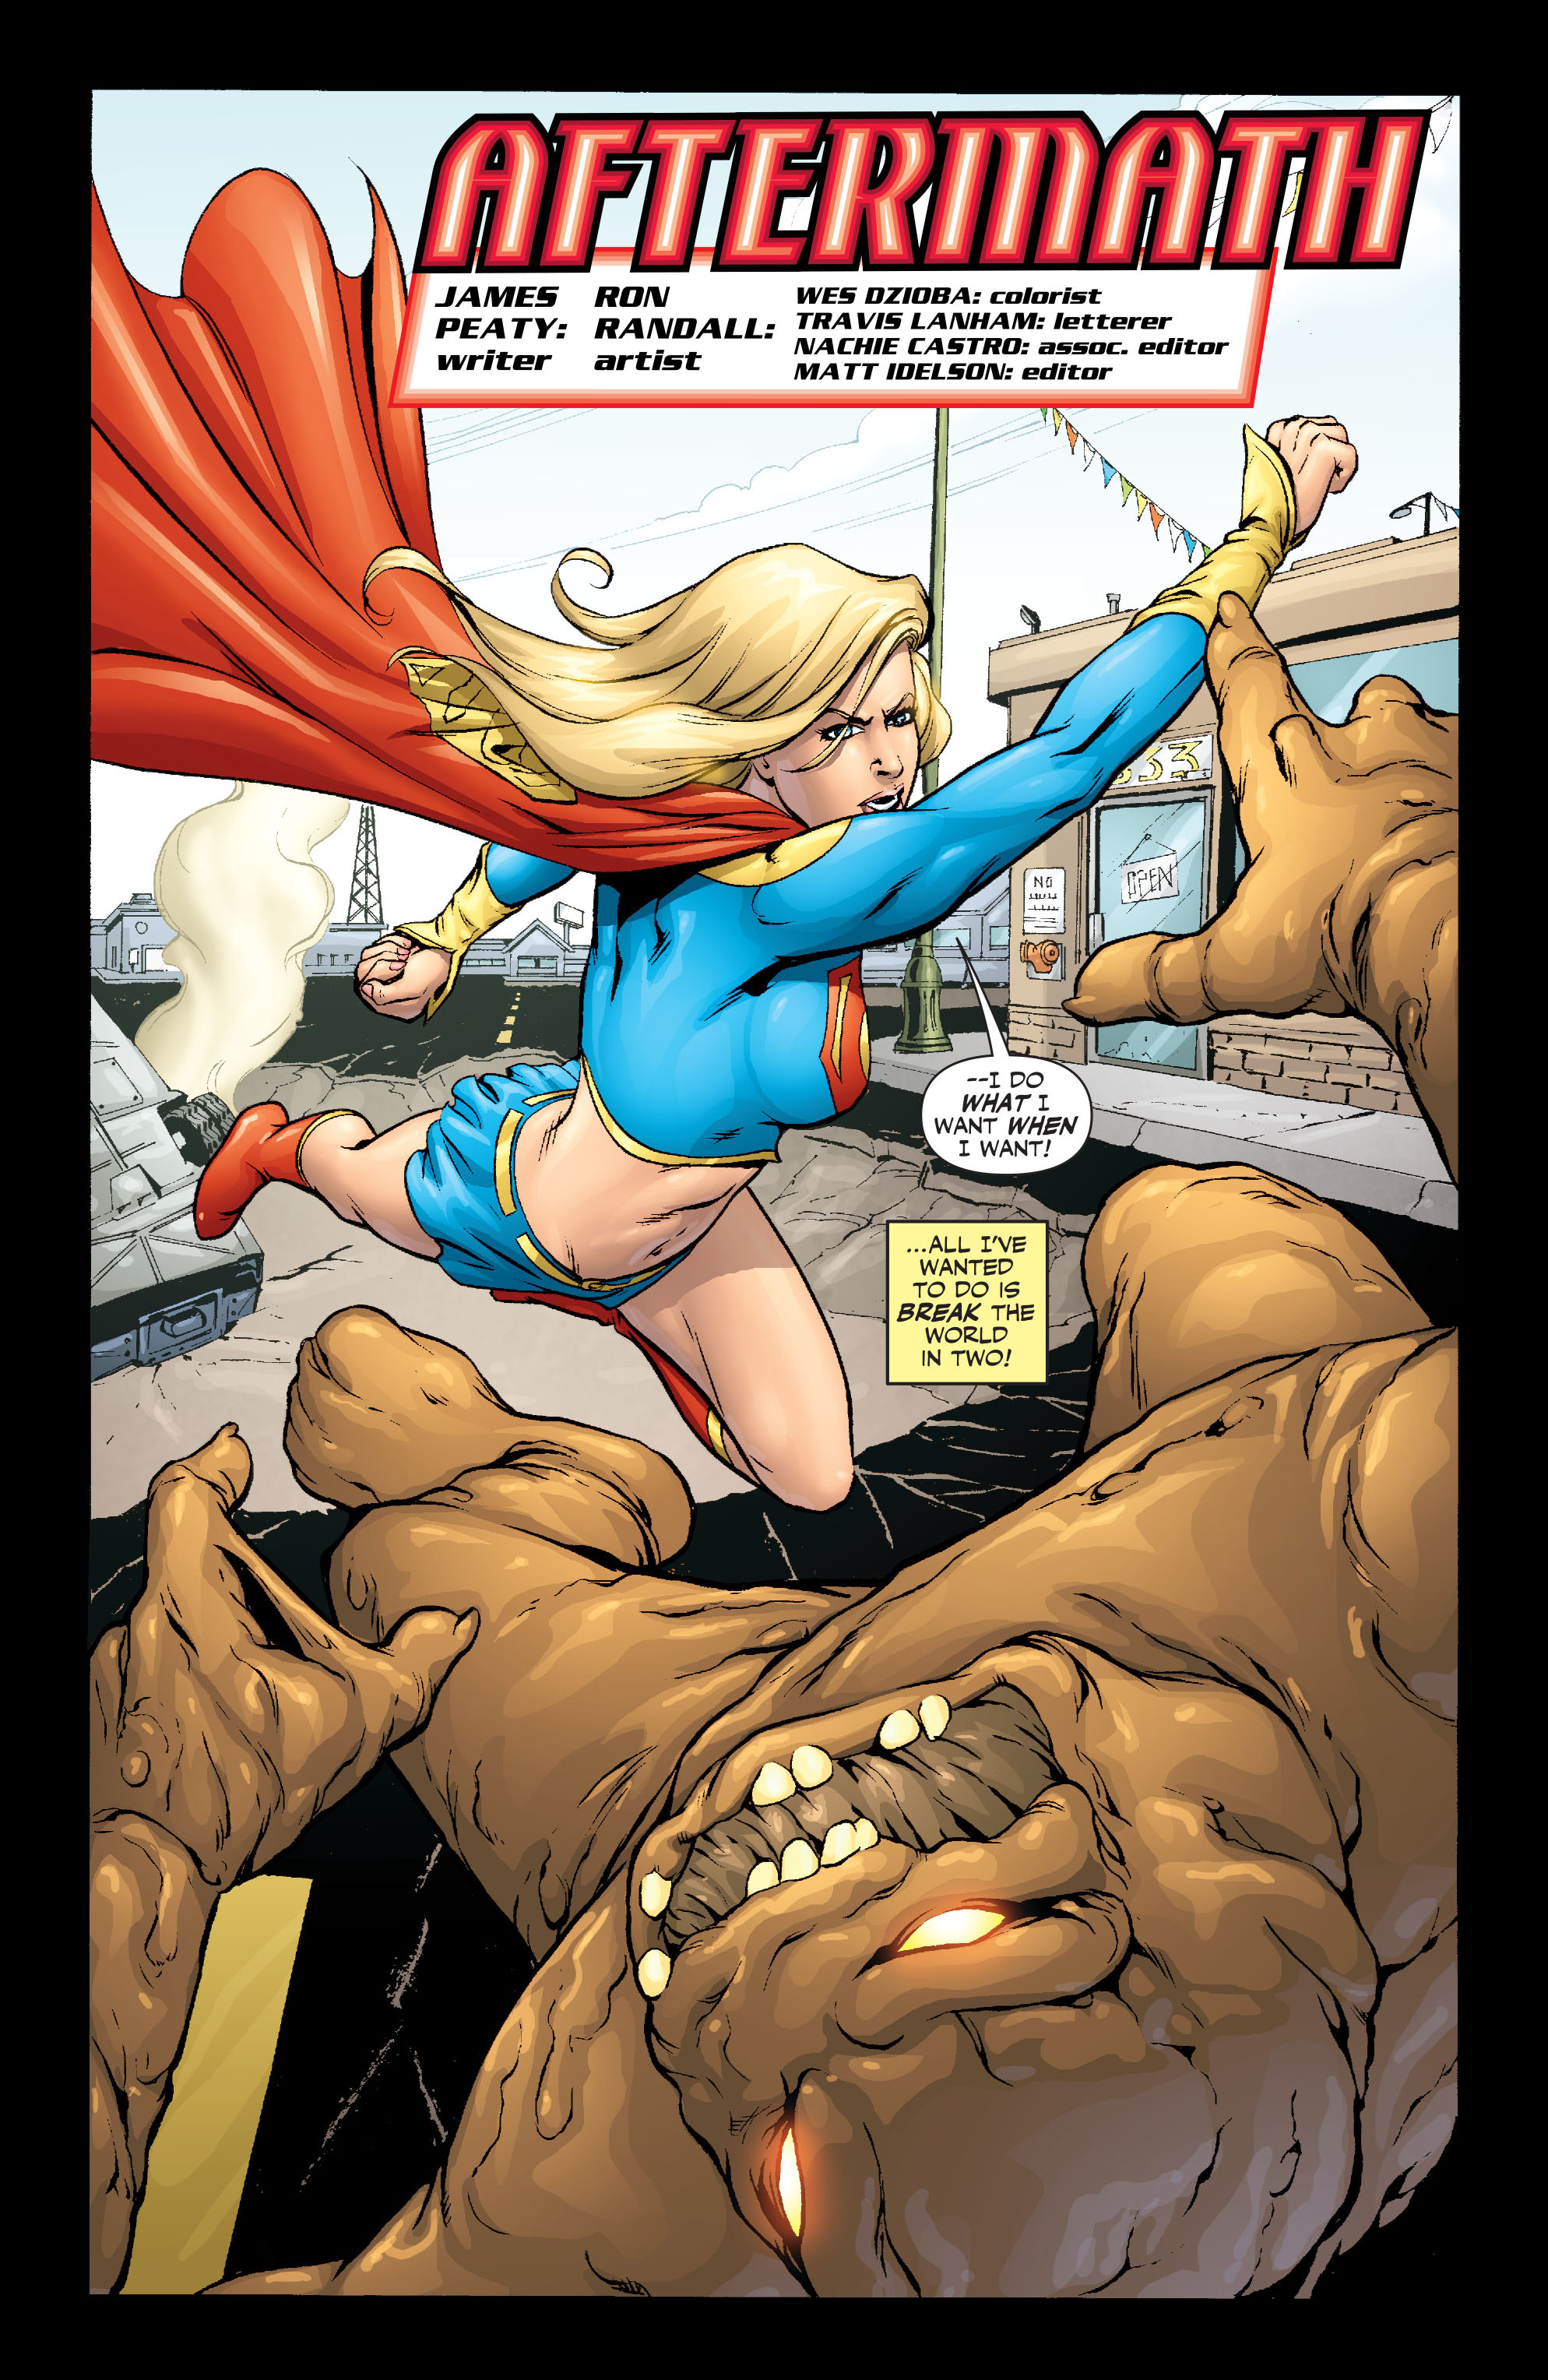 Supergirl (2005) 33 Page 2